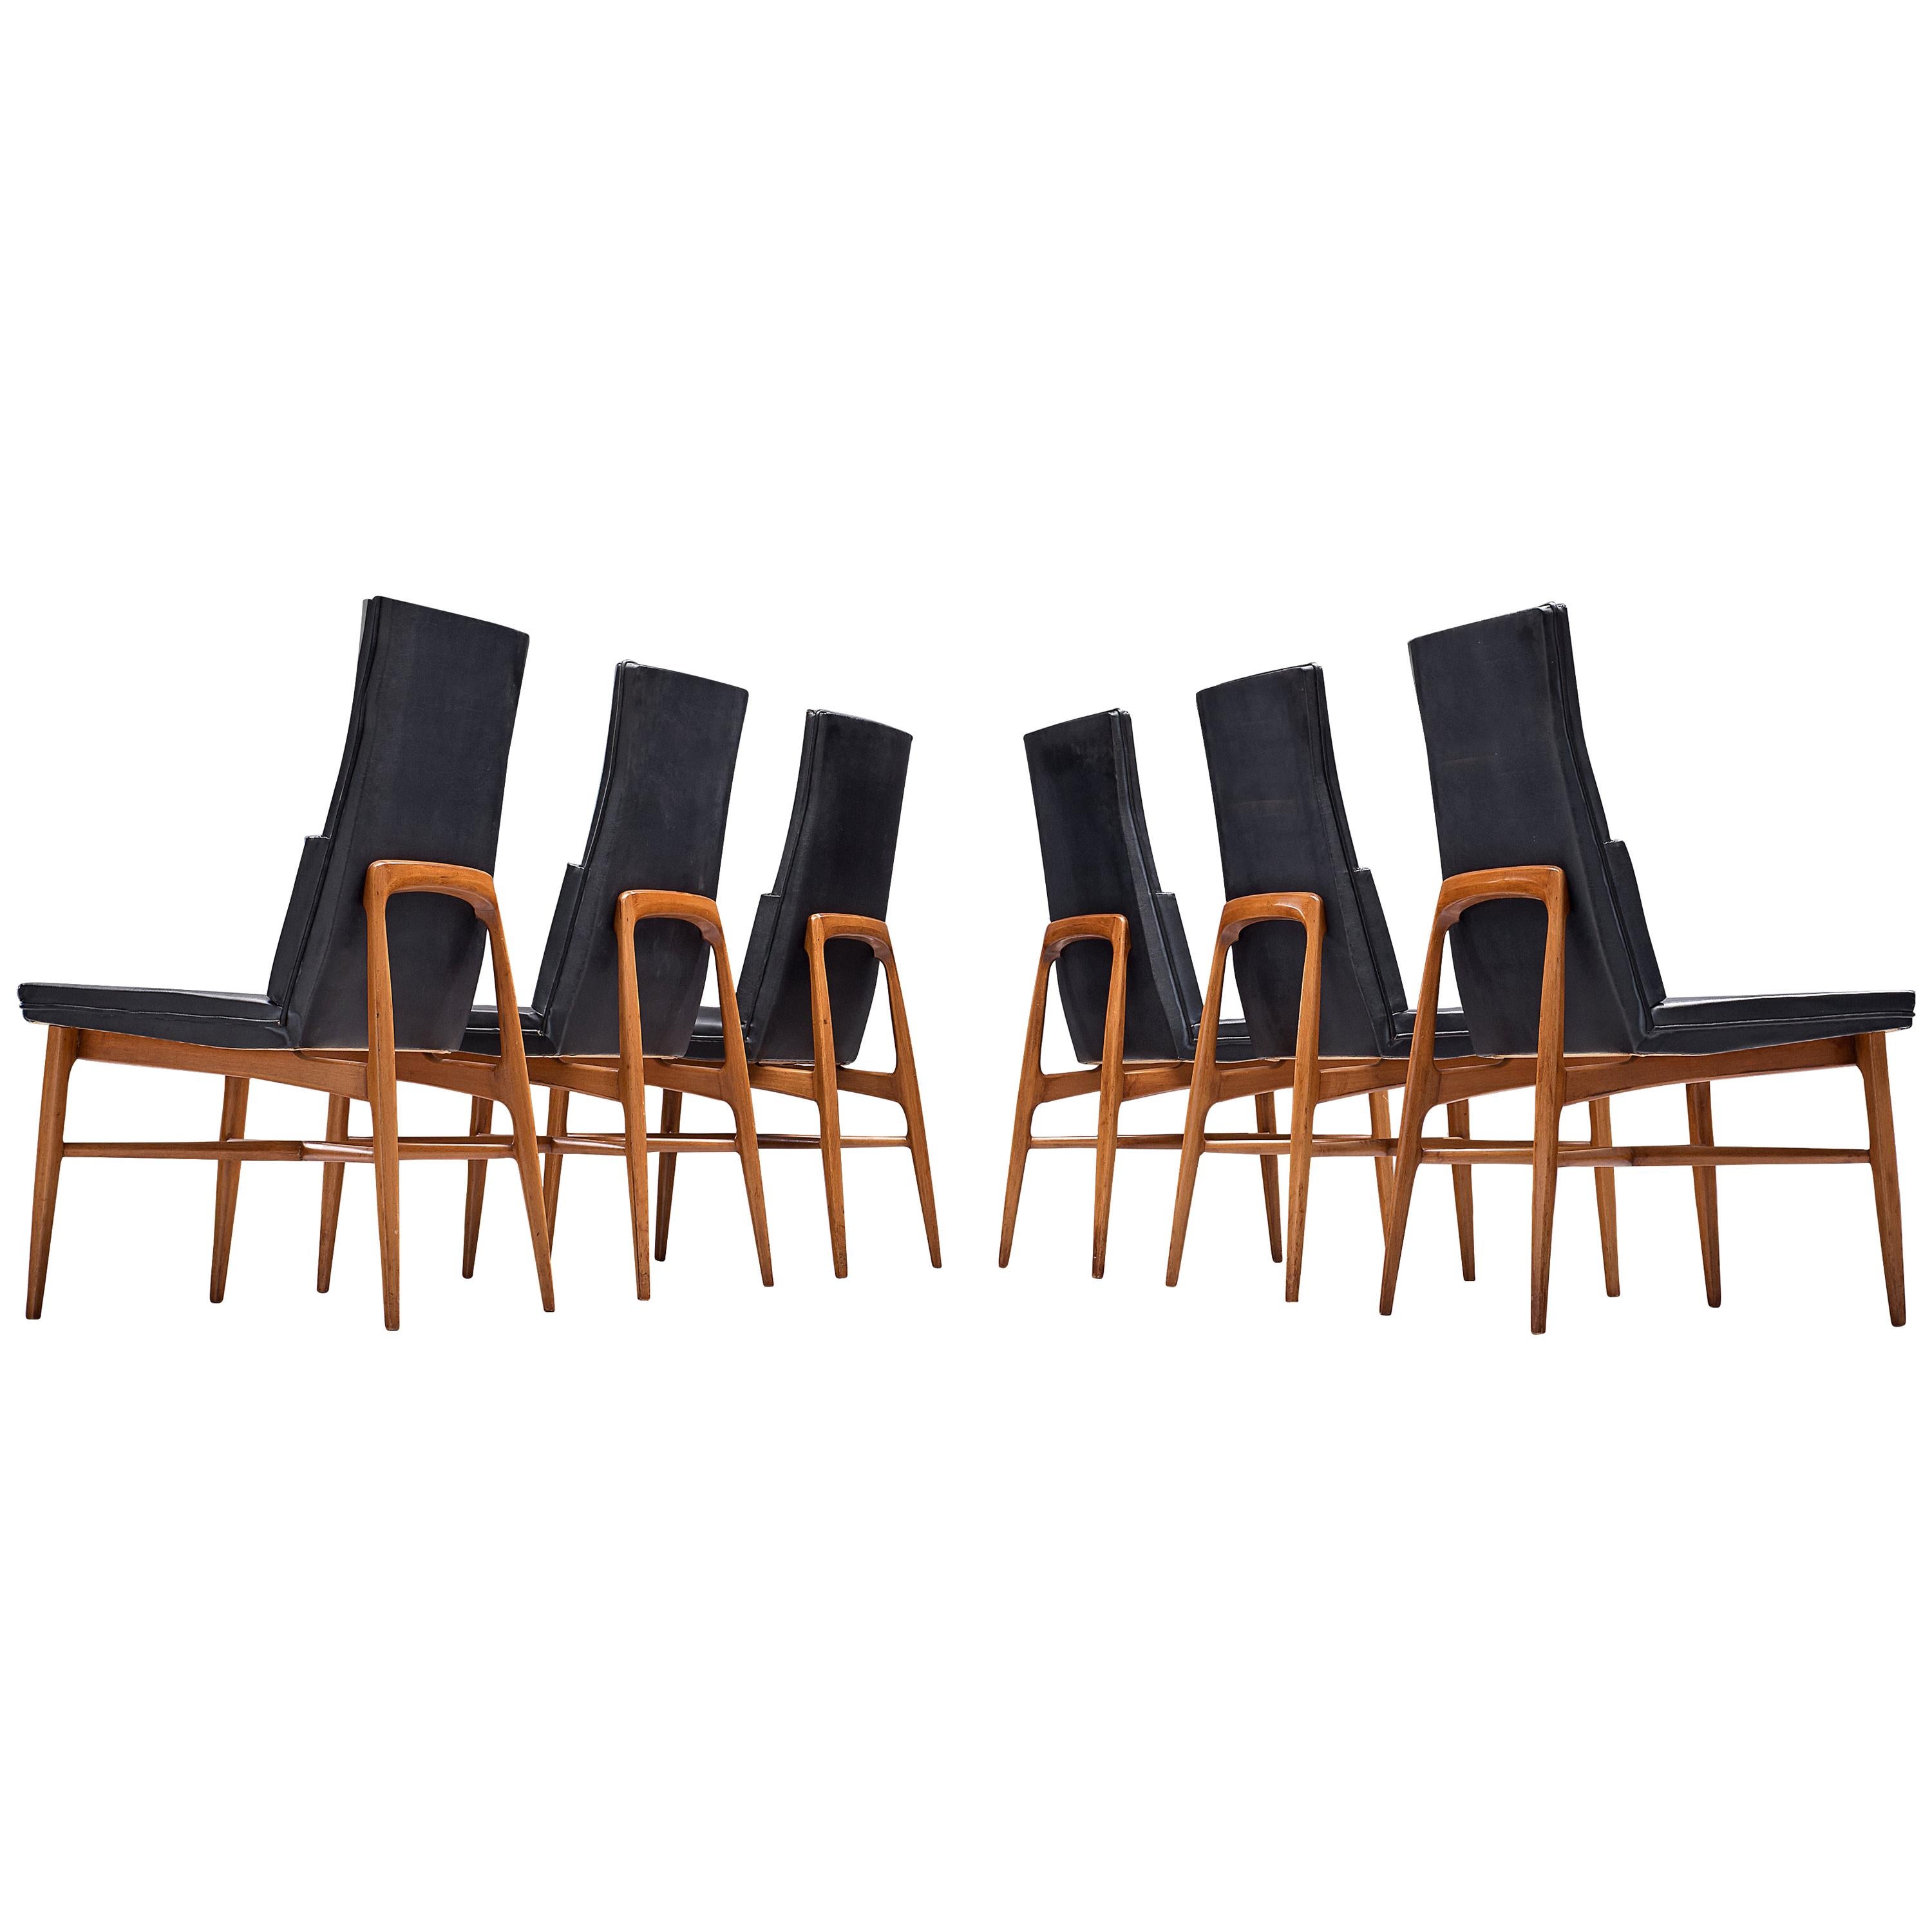 De Coene Frères Dining Room Chairs